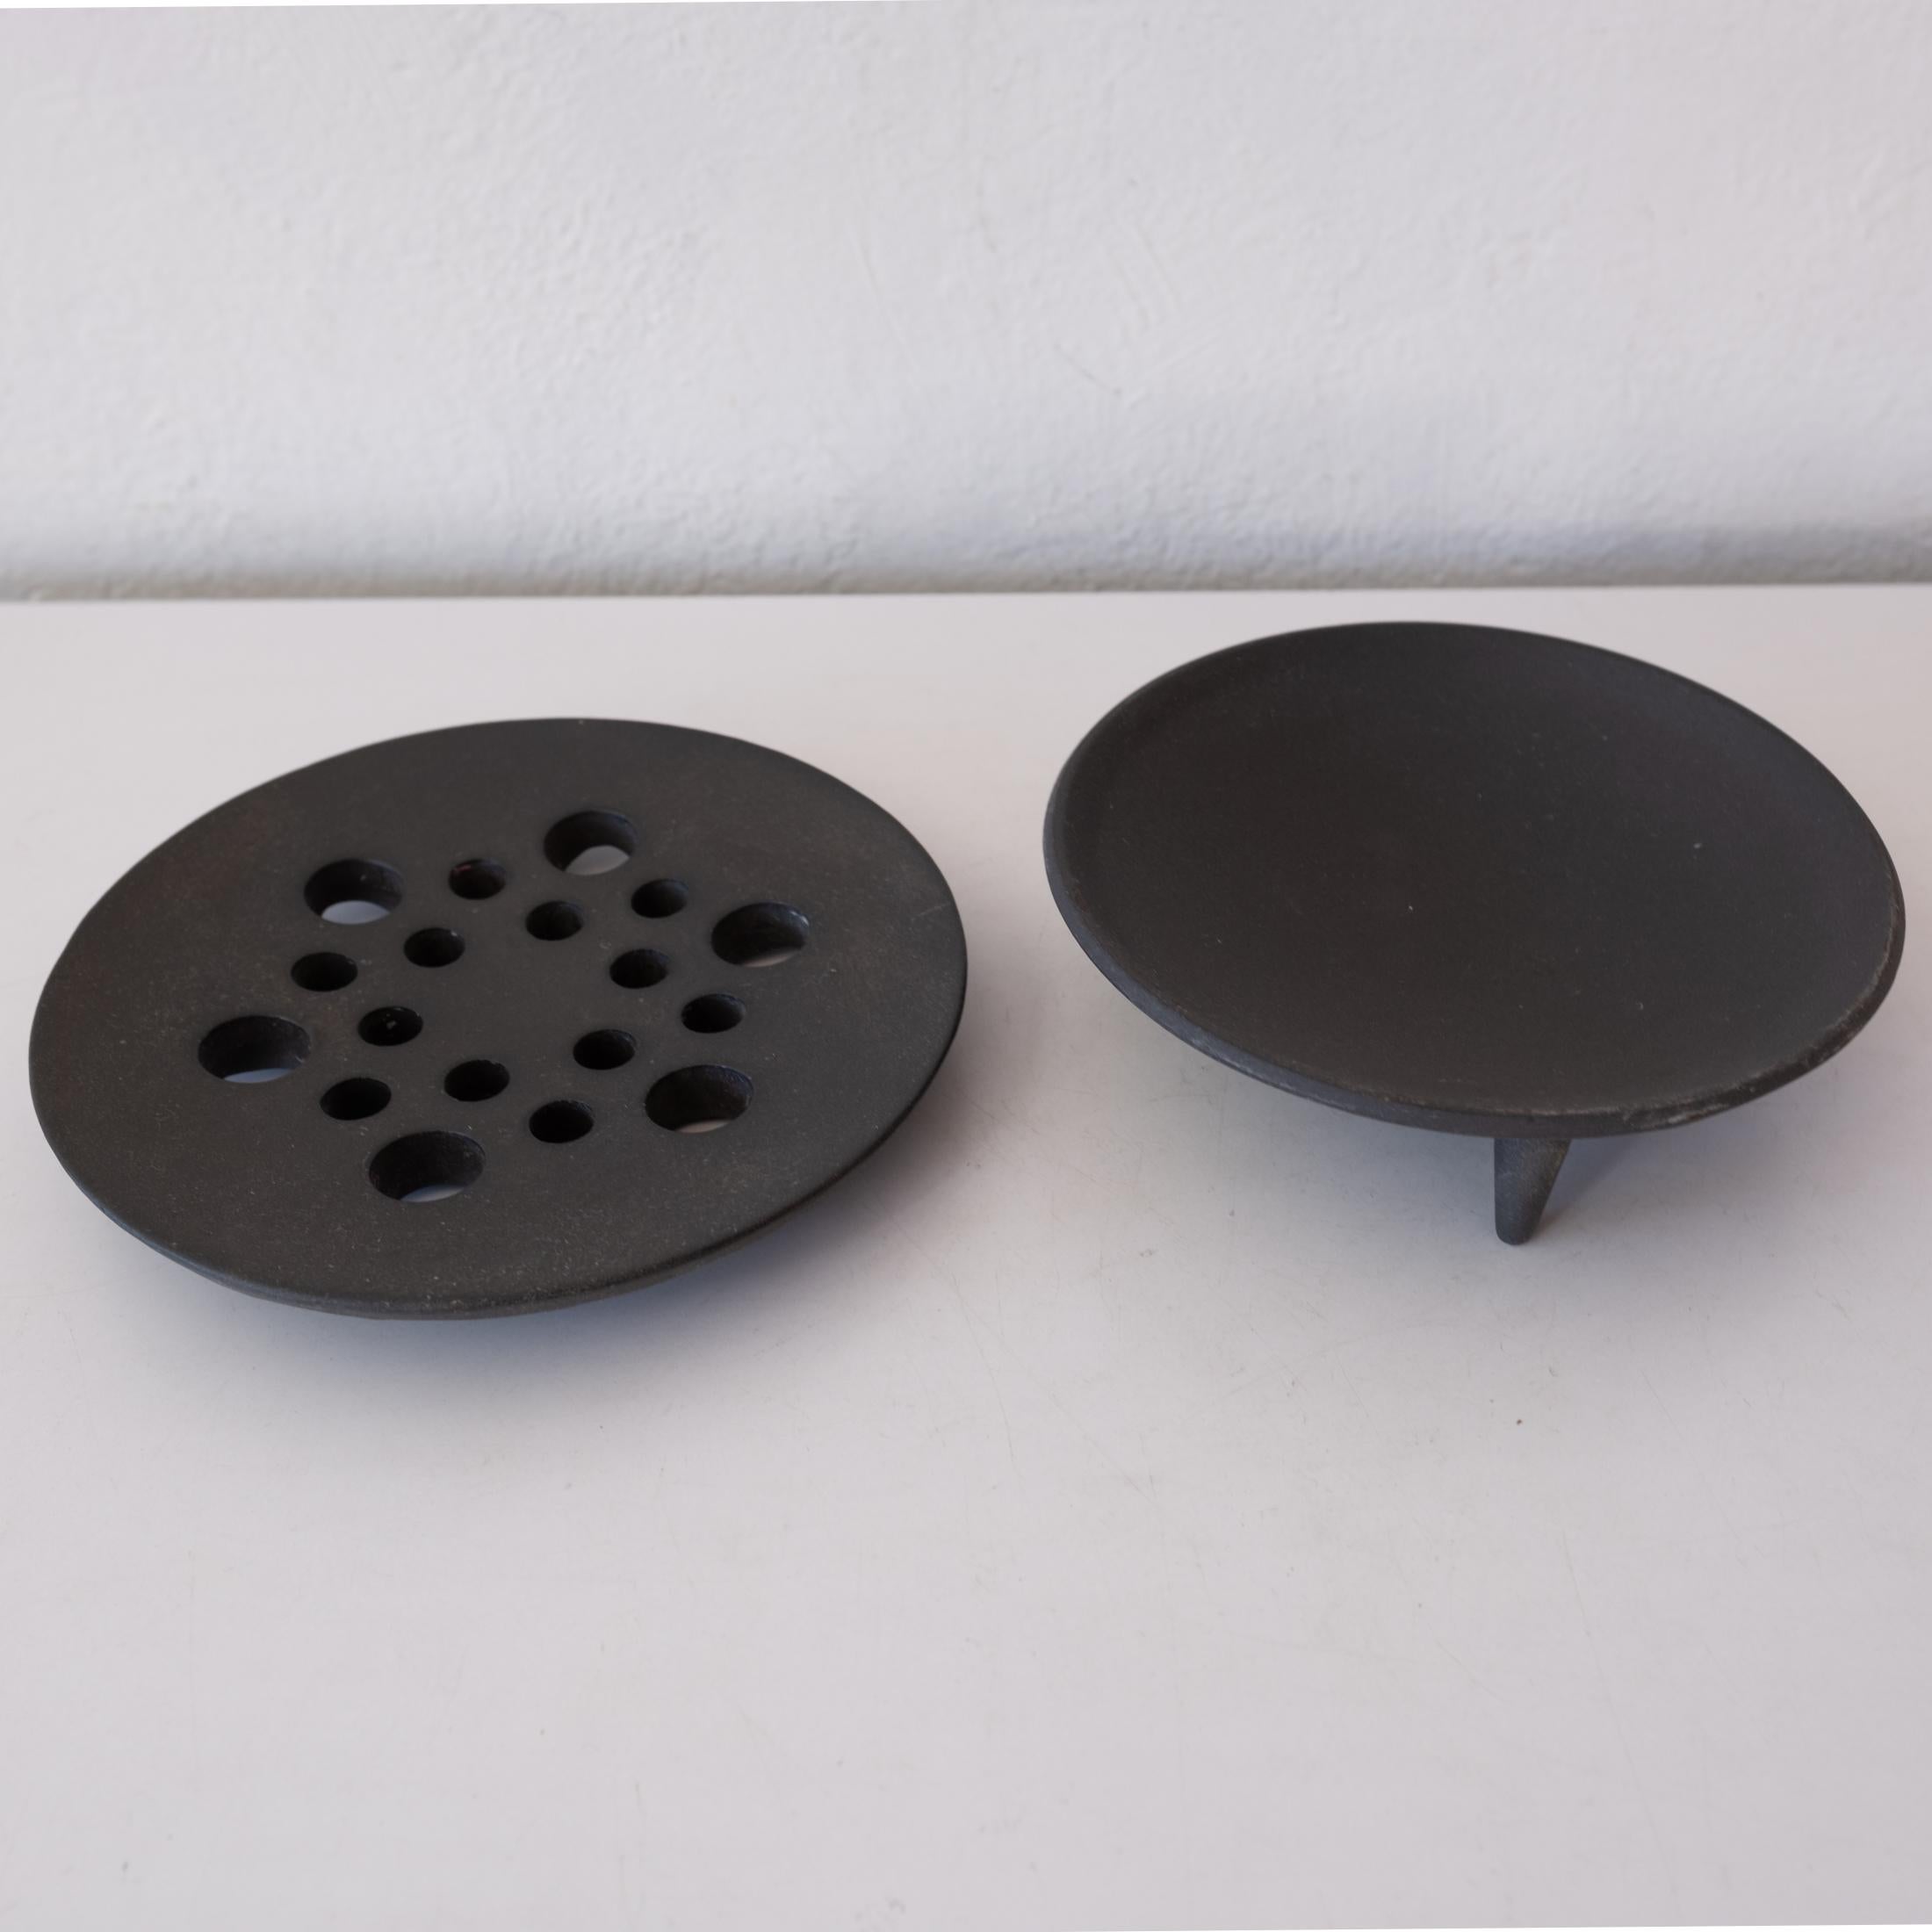 Jens Quistgaard Modernist Tripod Iron Candle Incense Holder Dansk Original Box In Good Condition For Sale In San Diego, CA